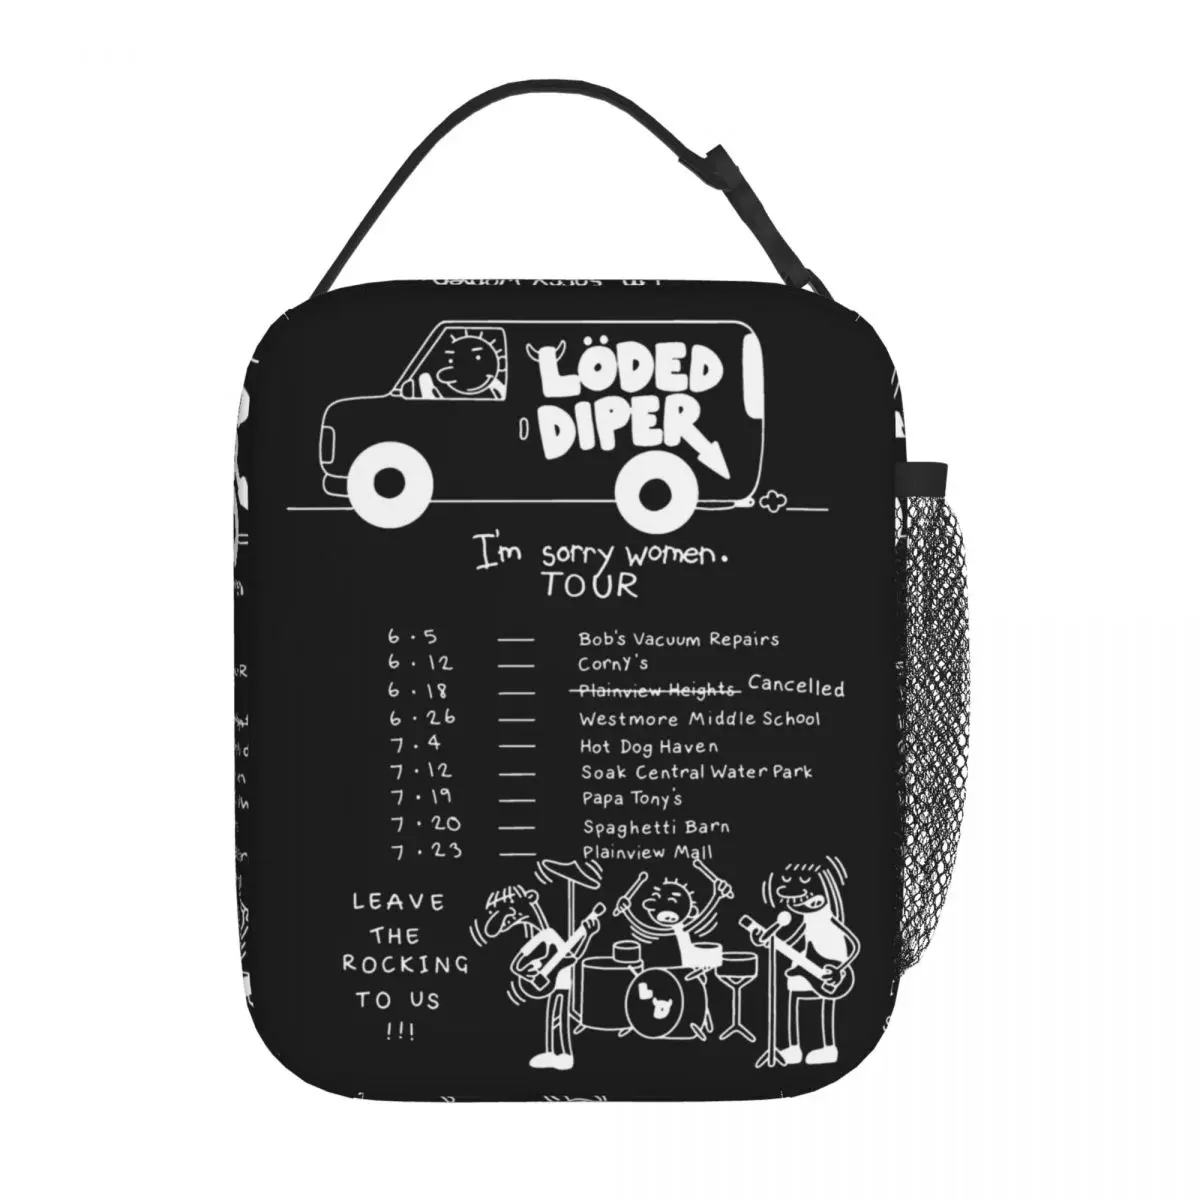 

Insulated Lunch Tote Bag Rock Band Loded Diper Tour White Product Food Box Ins Style Thermal Cooler Lunch Box For School